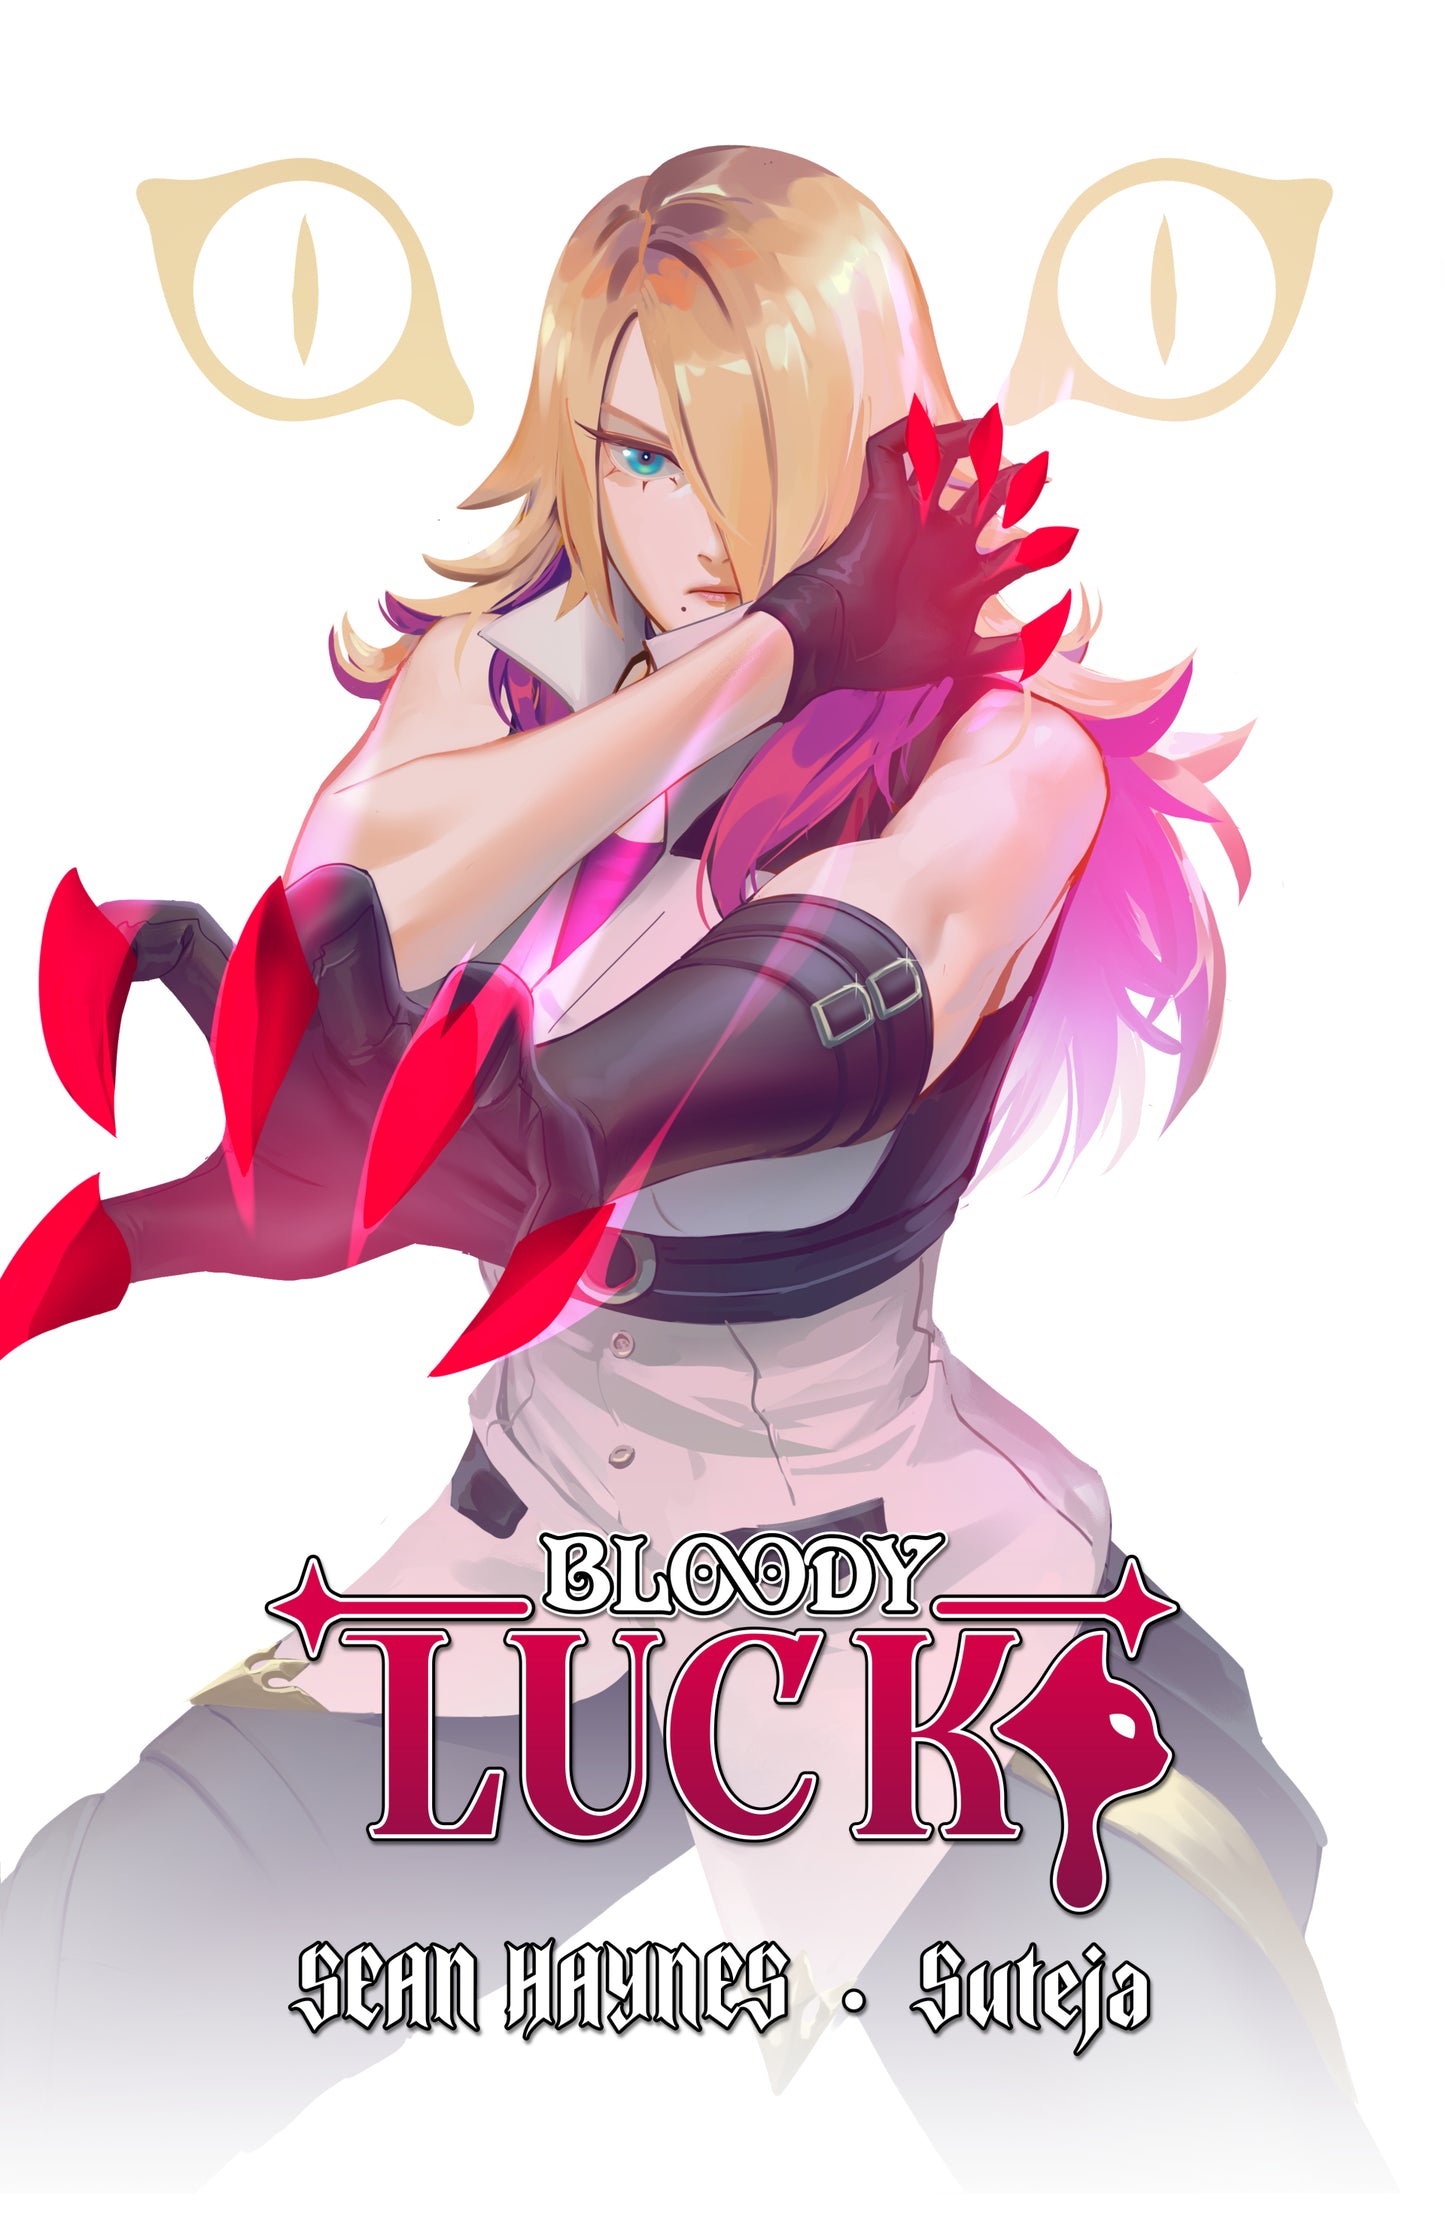 [Bloody Luck] Bloody Luck Cover Art Print